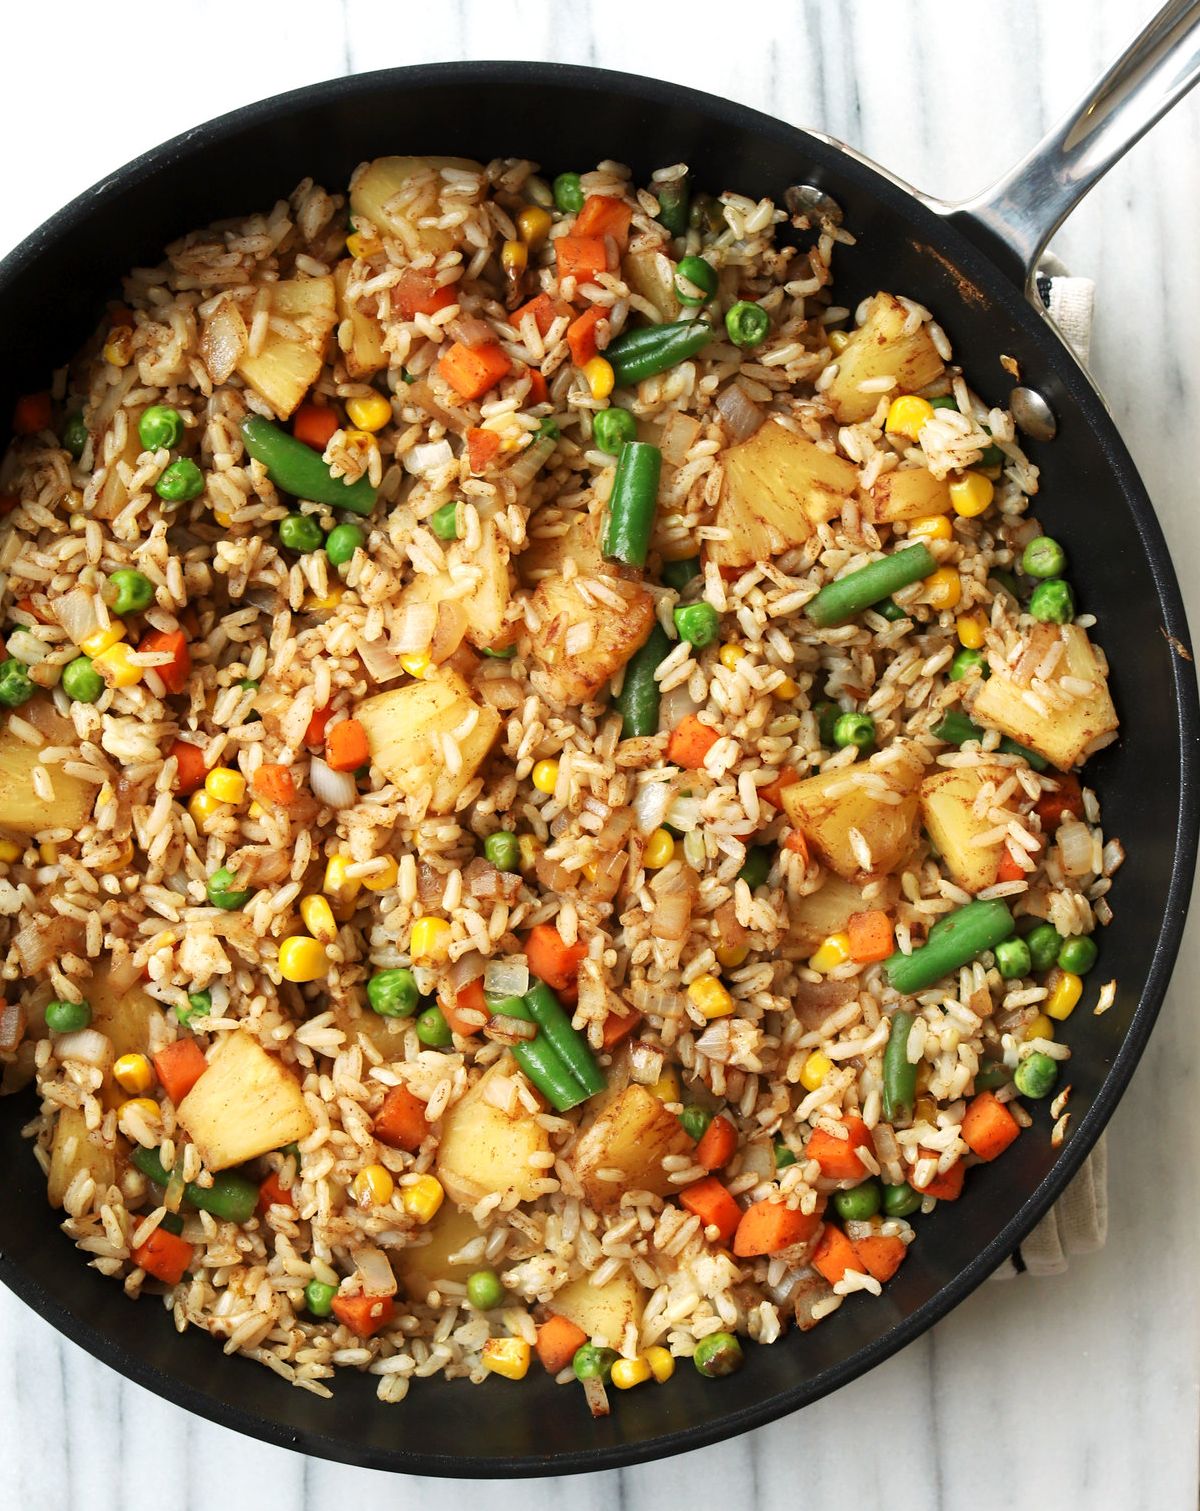 Easy Pineapple Fried Rice by eatingforironman | The Feedfeed